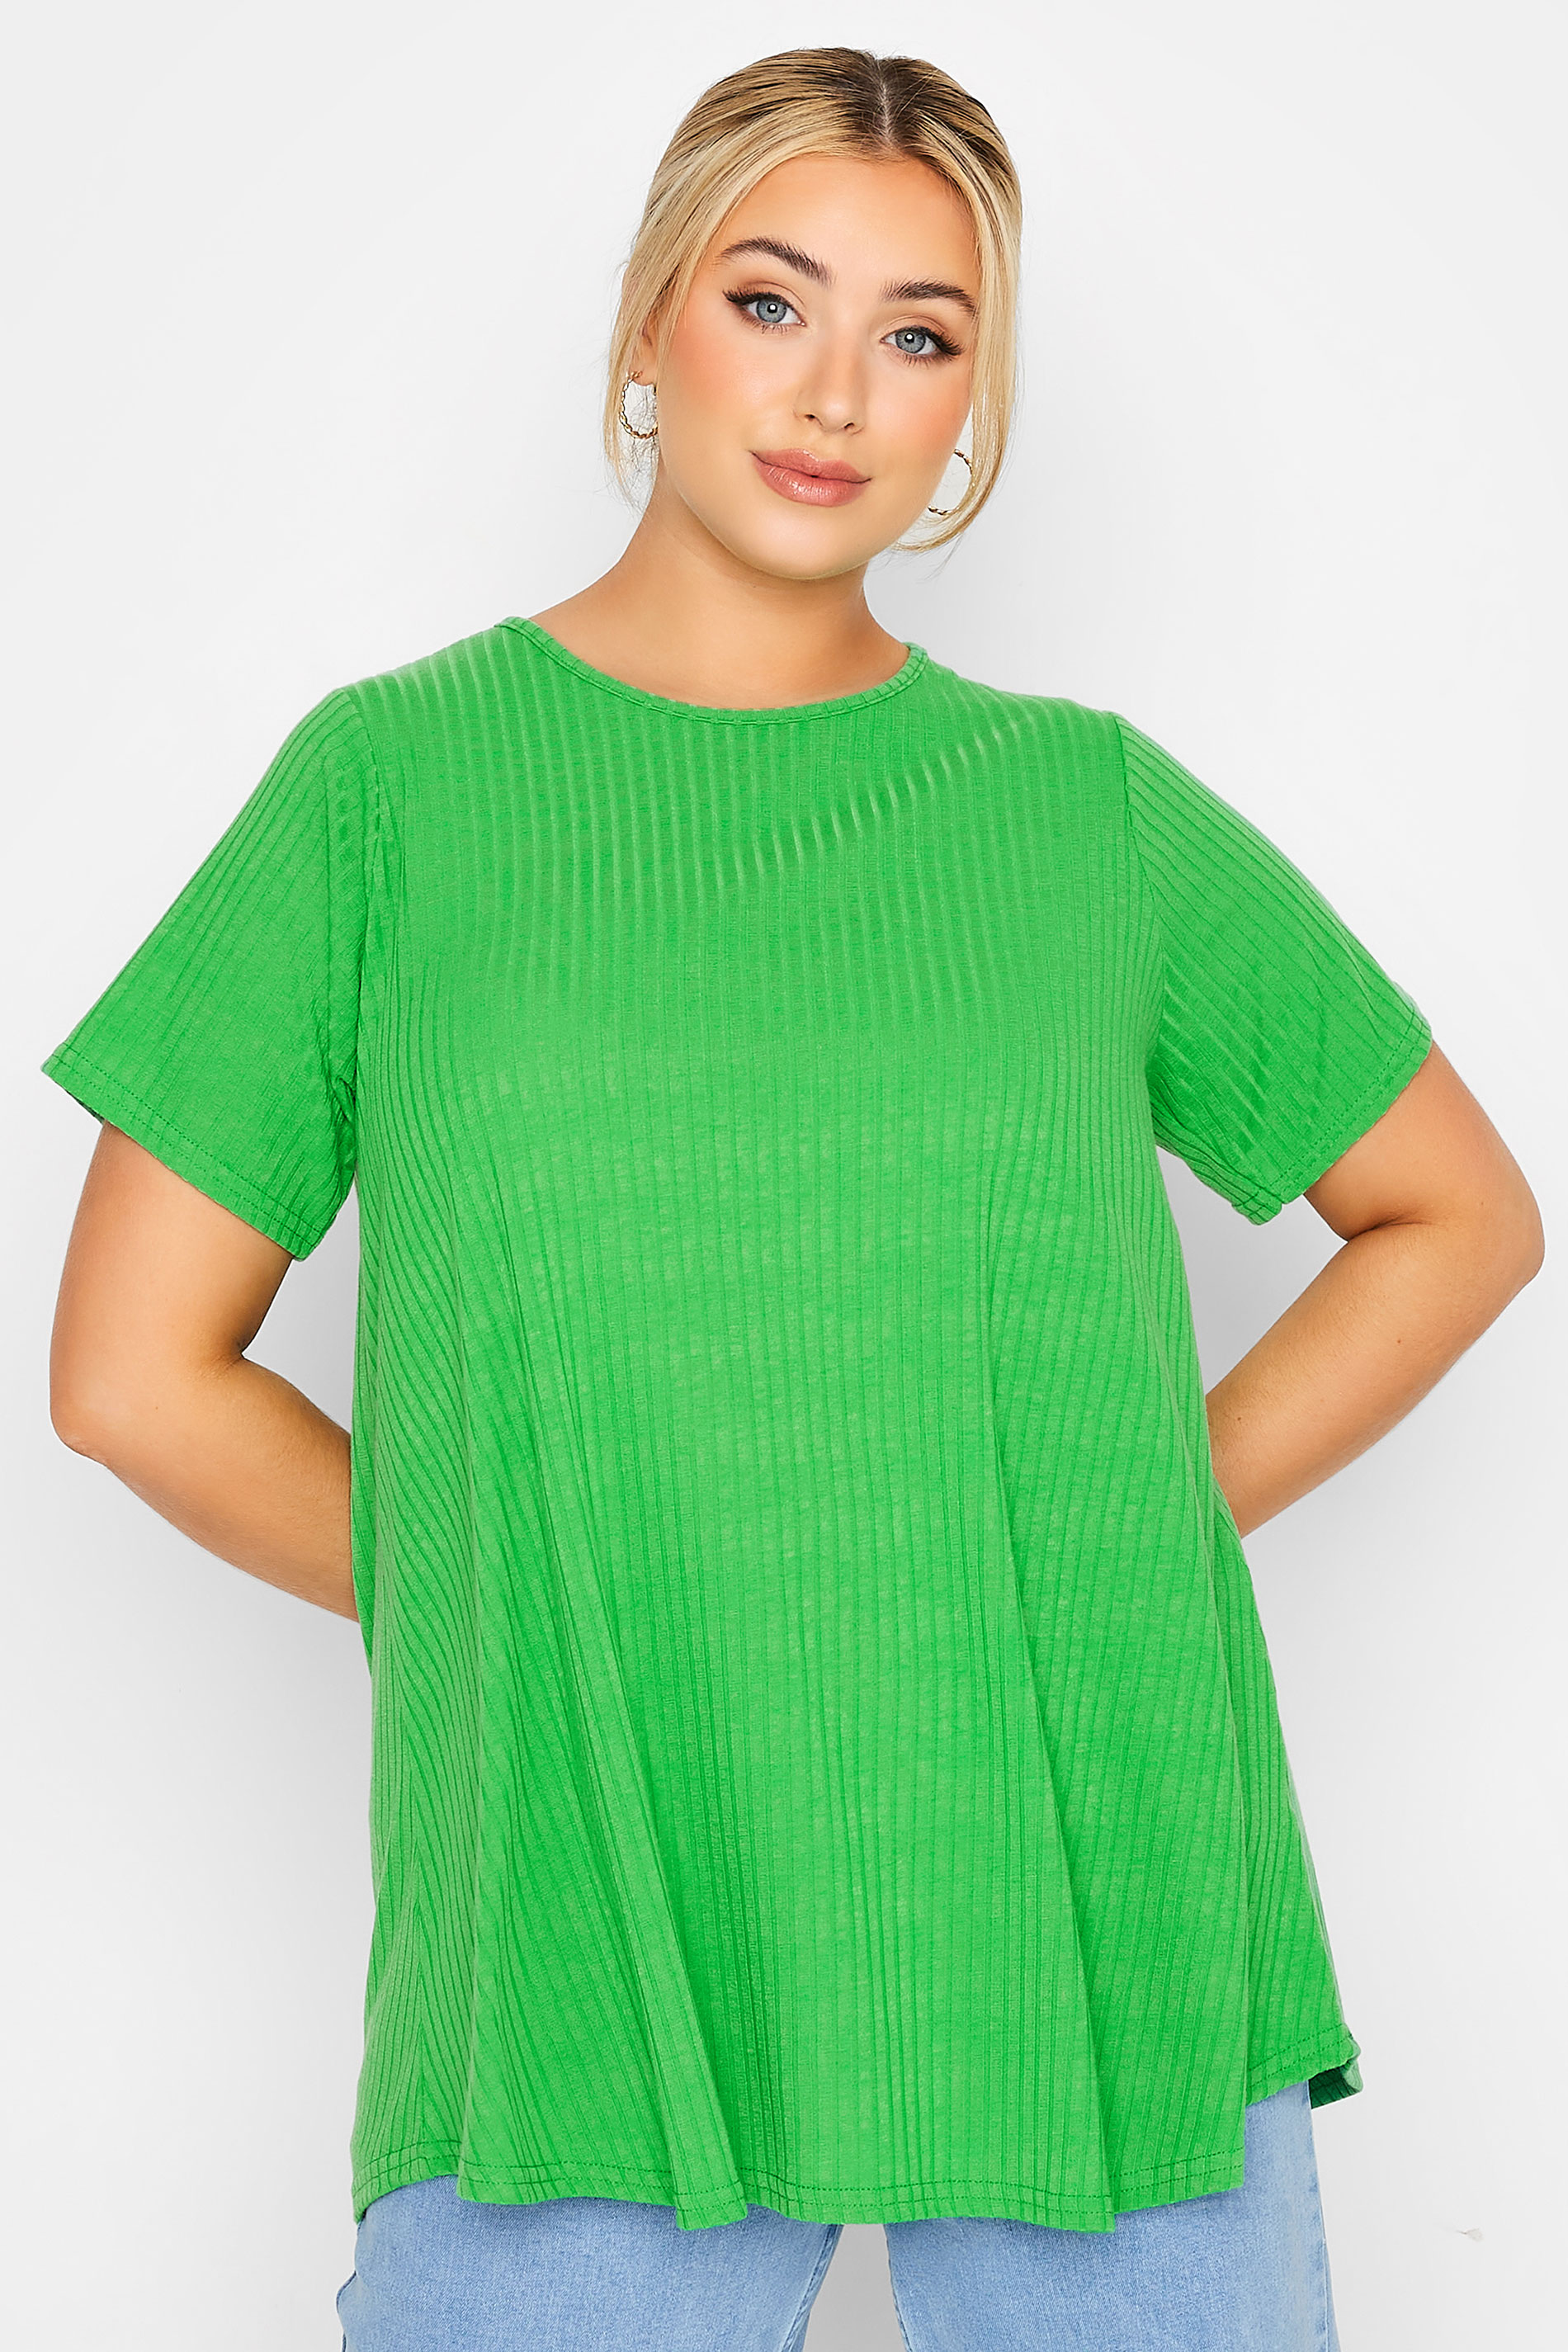 Grande taille  Tops Grande taille  Tops Jersey | LIMITED COLLECTION - Top Vert Pomme Nervuré Style Volanté - KF00909